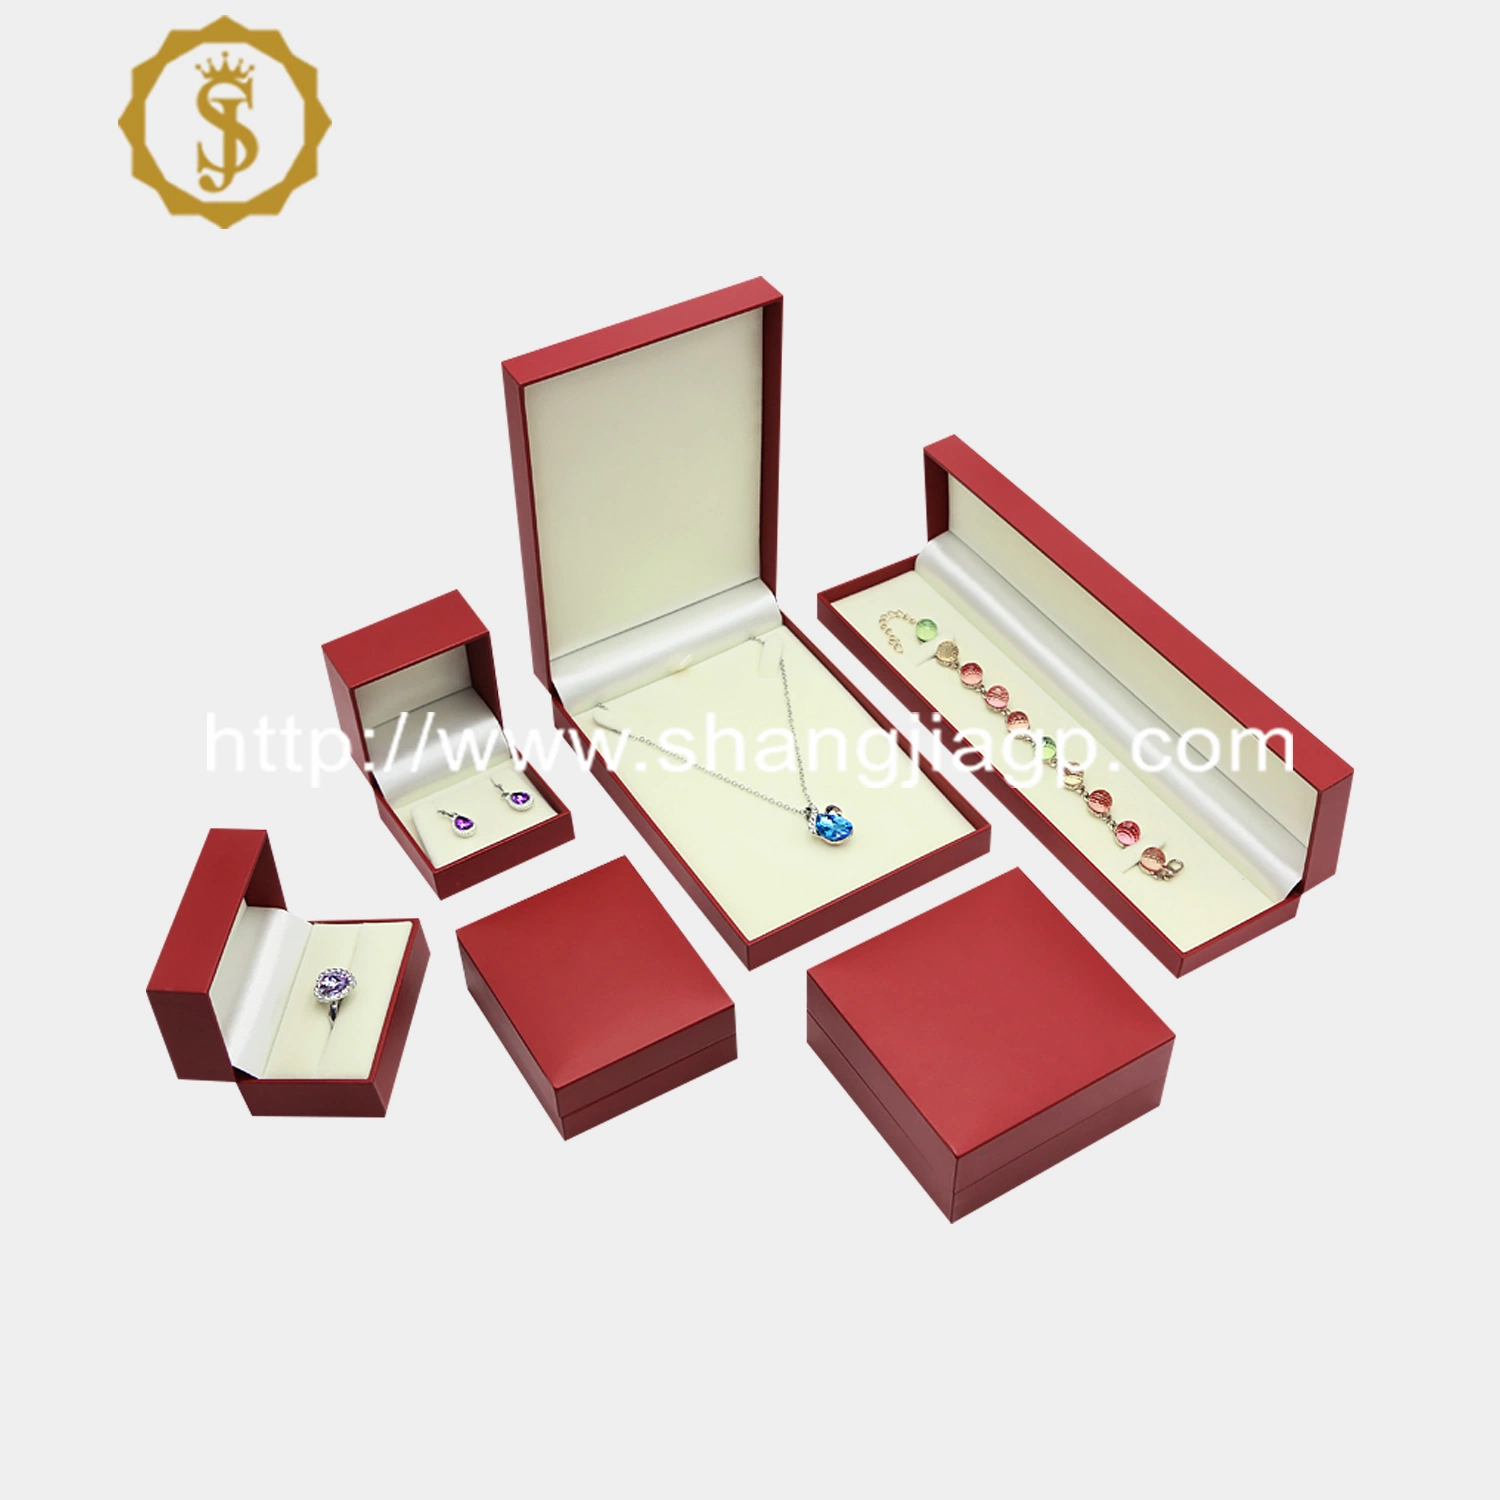 Plastic Customized Bracelet Leatherette Personalized Jewelry Box Logo and Set Luxury Wholesale Accessories Packaging